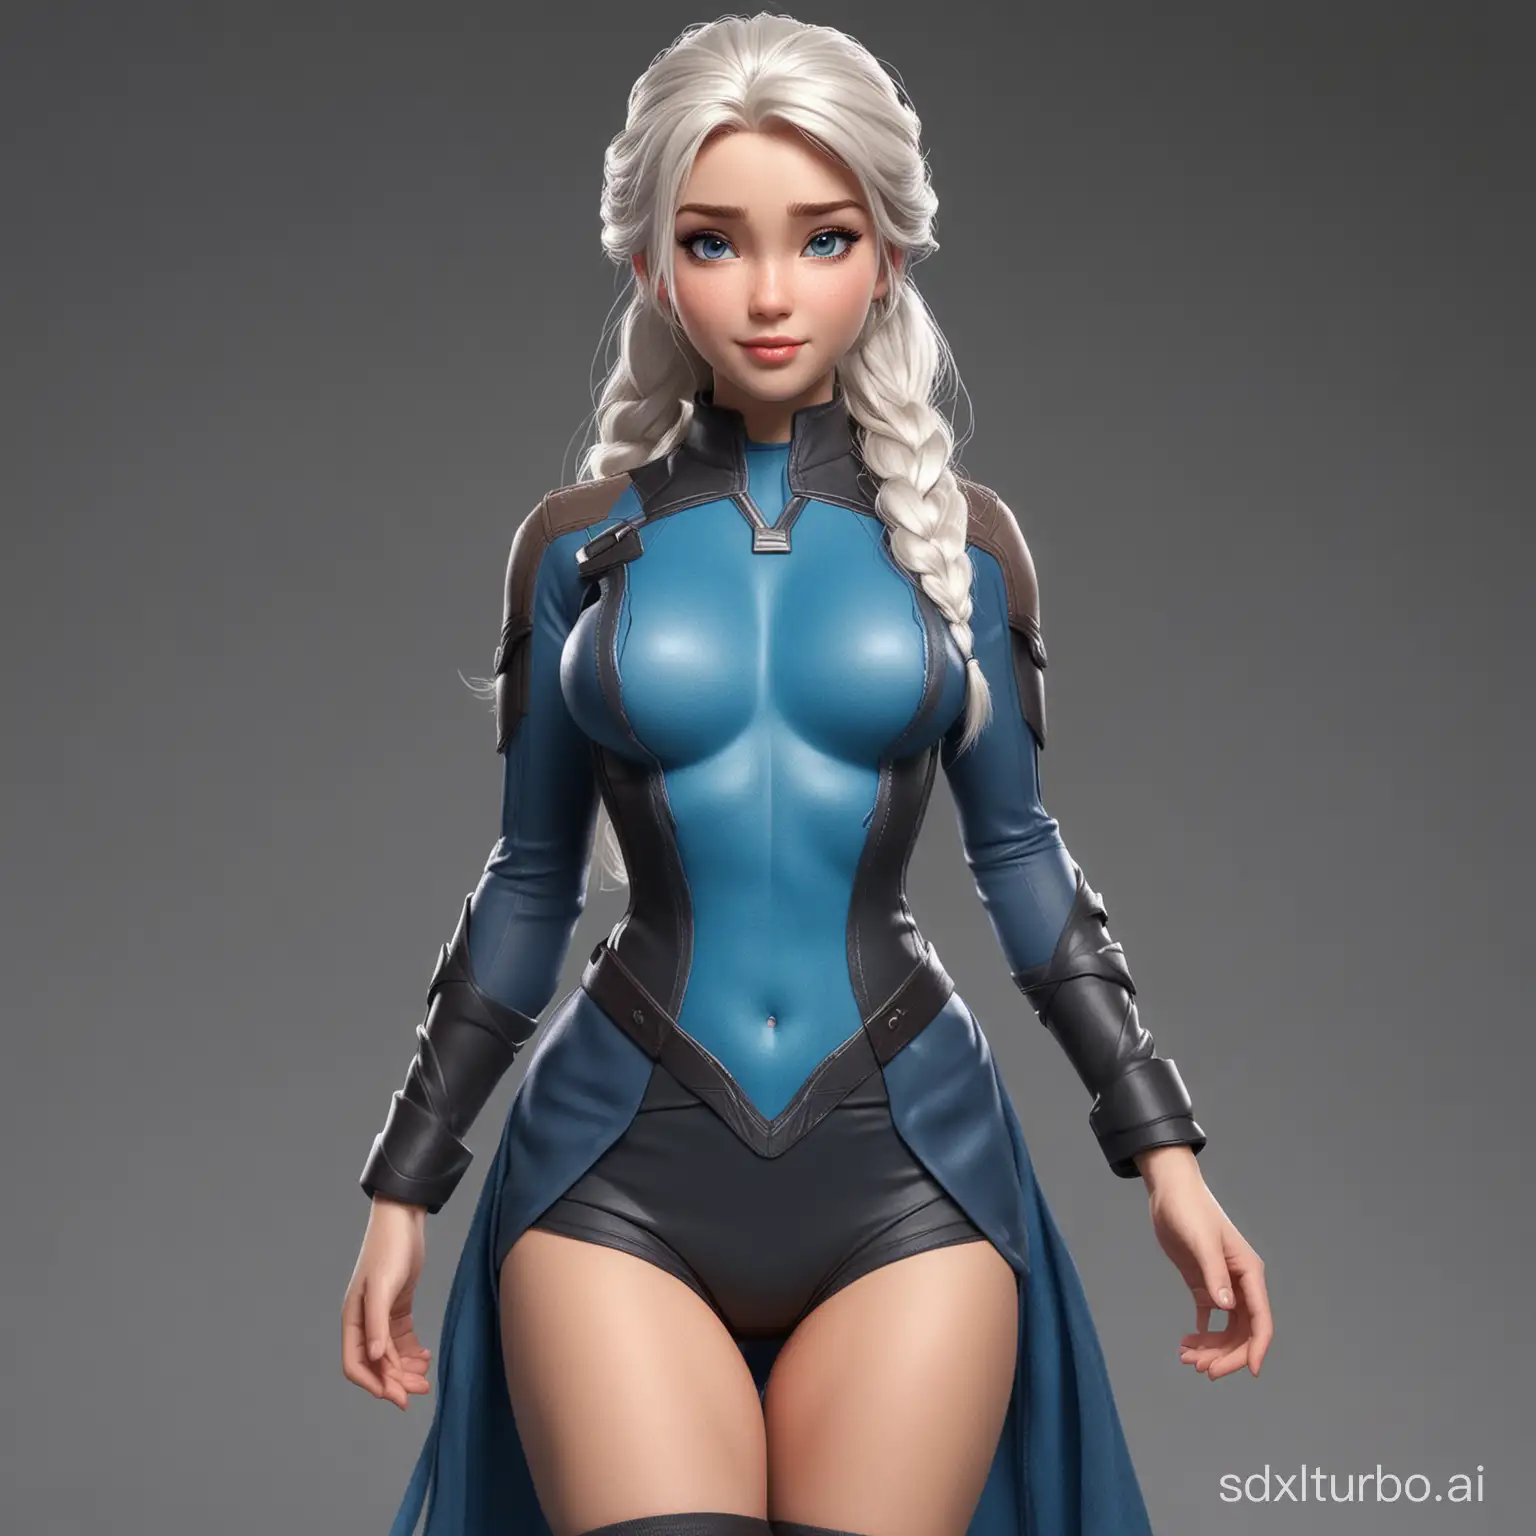 Powerful-Female-Superhero-in-XMen-Uniform-Inspired-by-Elsa-and-Rogue